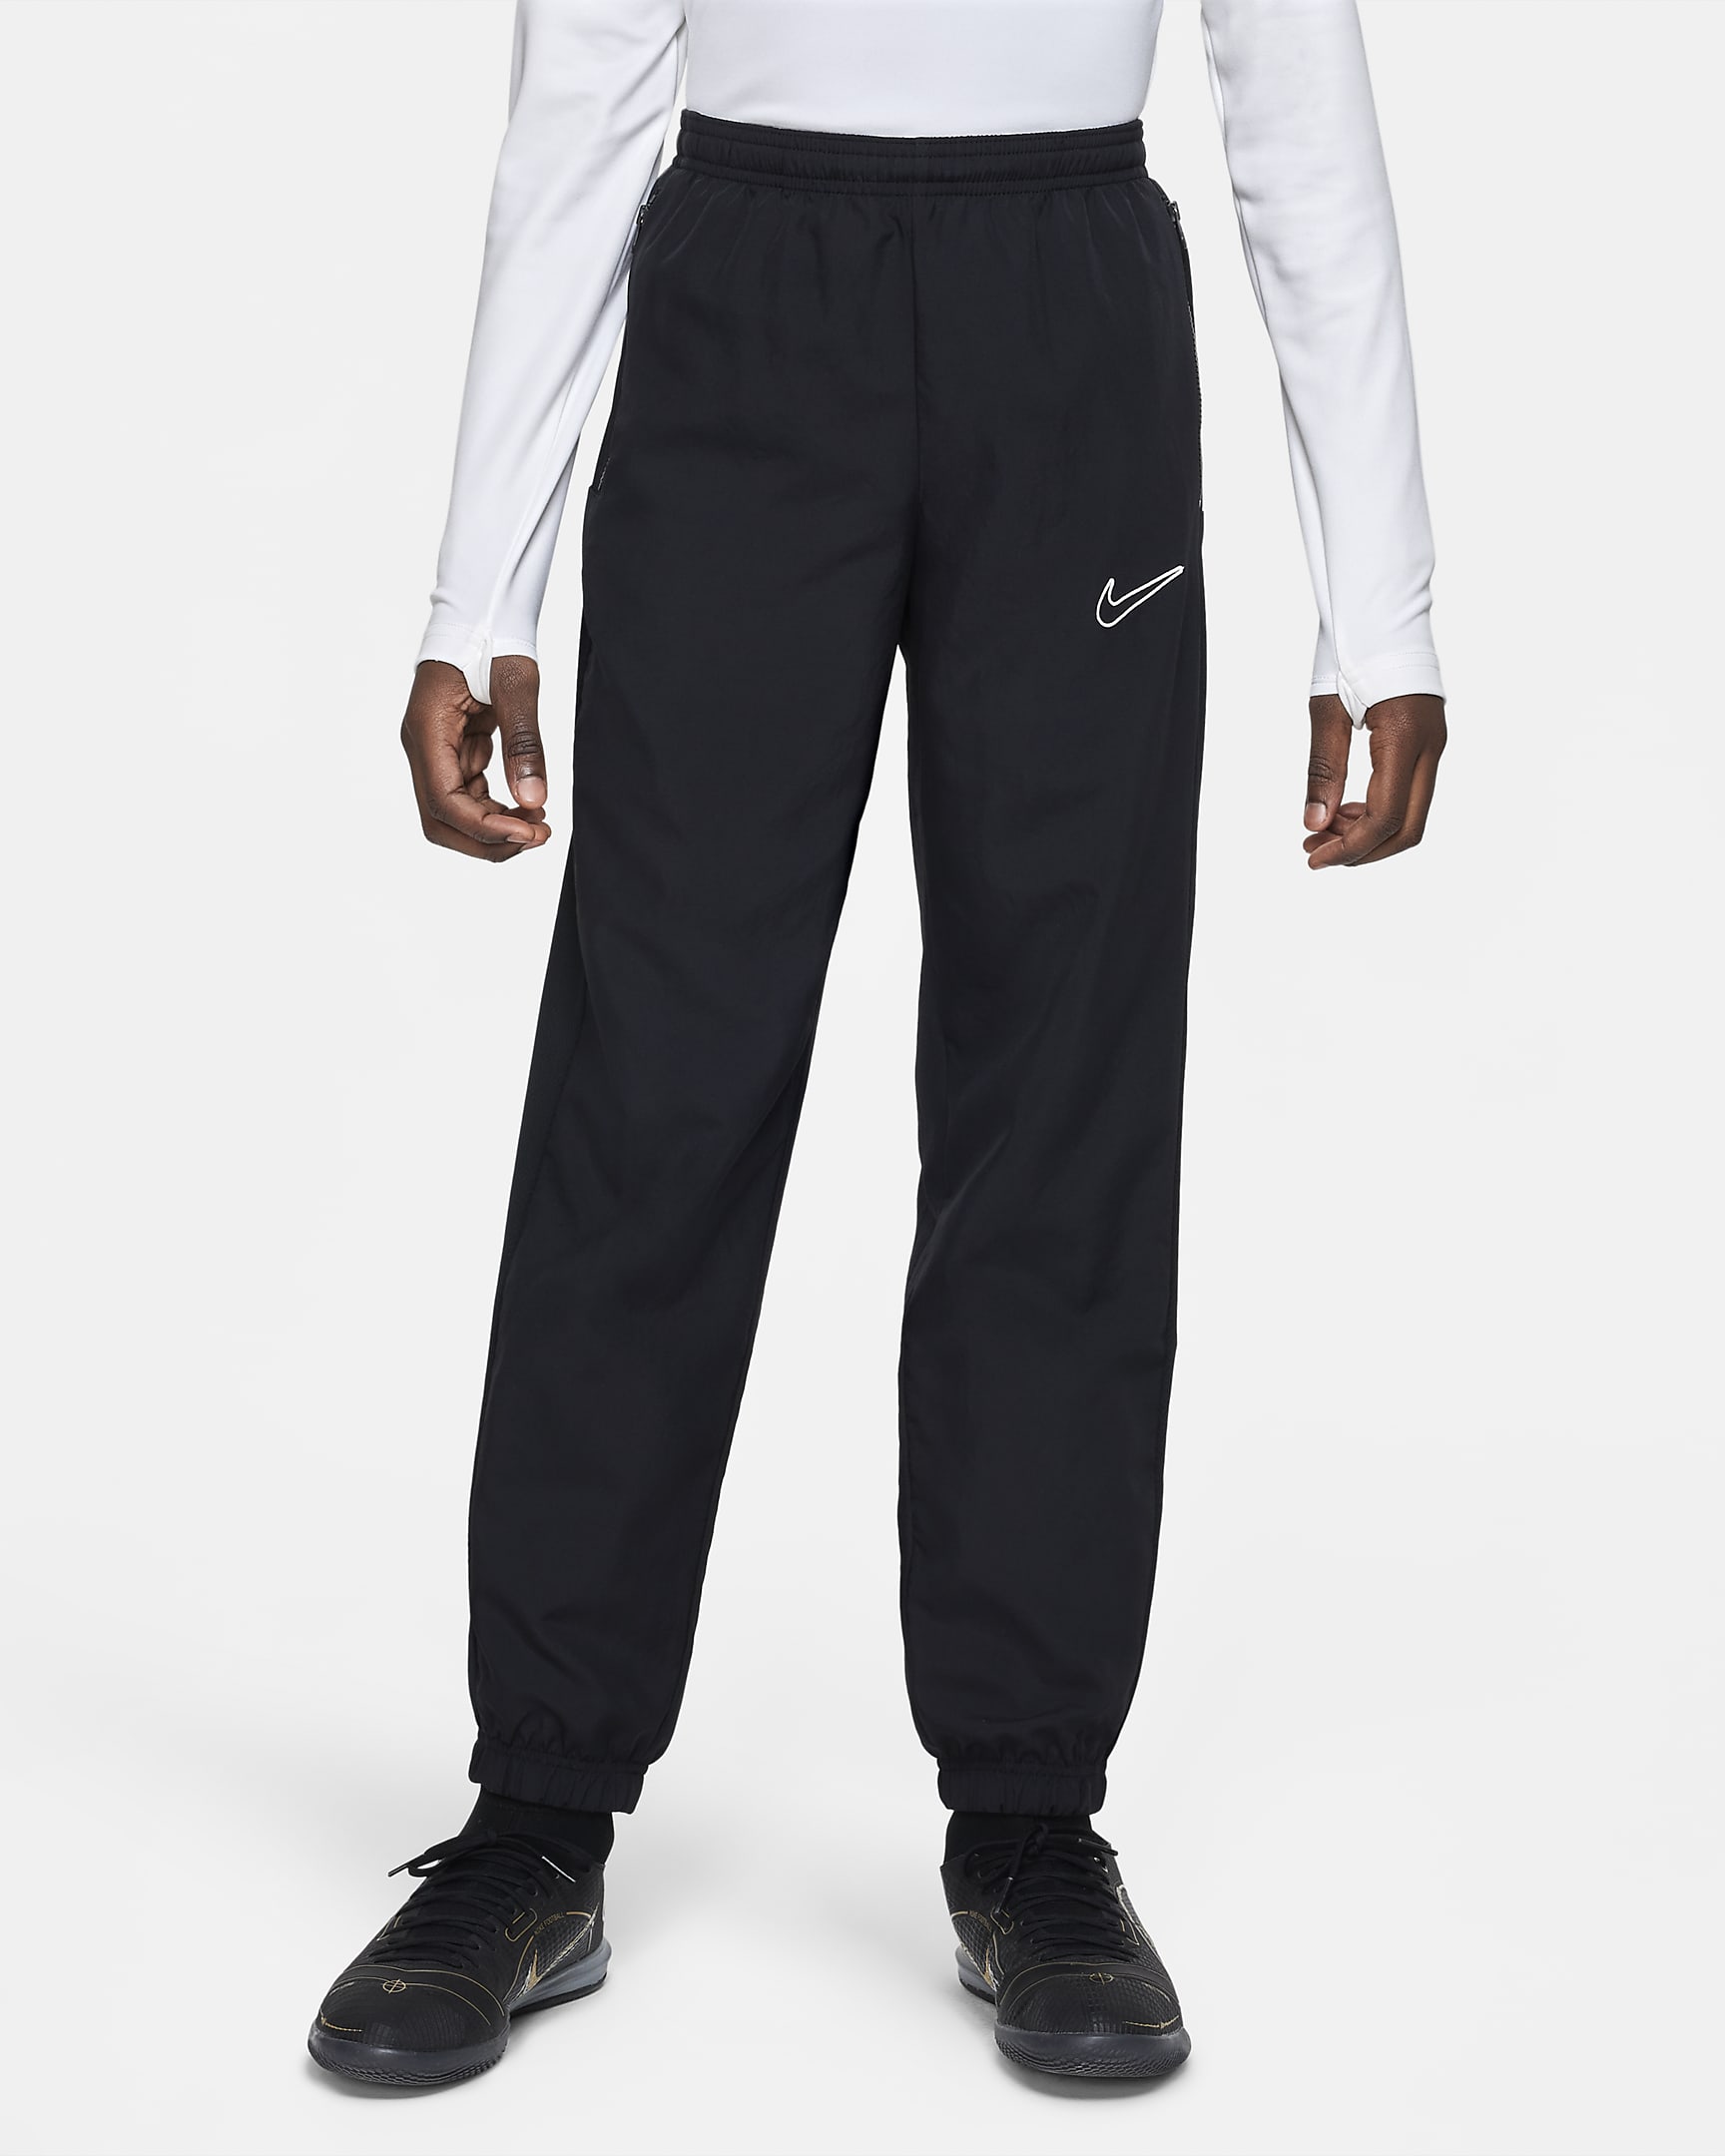 Nike Dri-FIT Academy Older Kids' Woven Football Tracksuit Bottoms ...